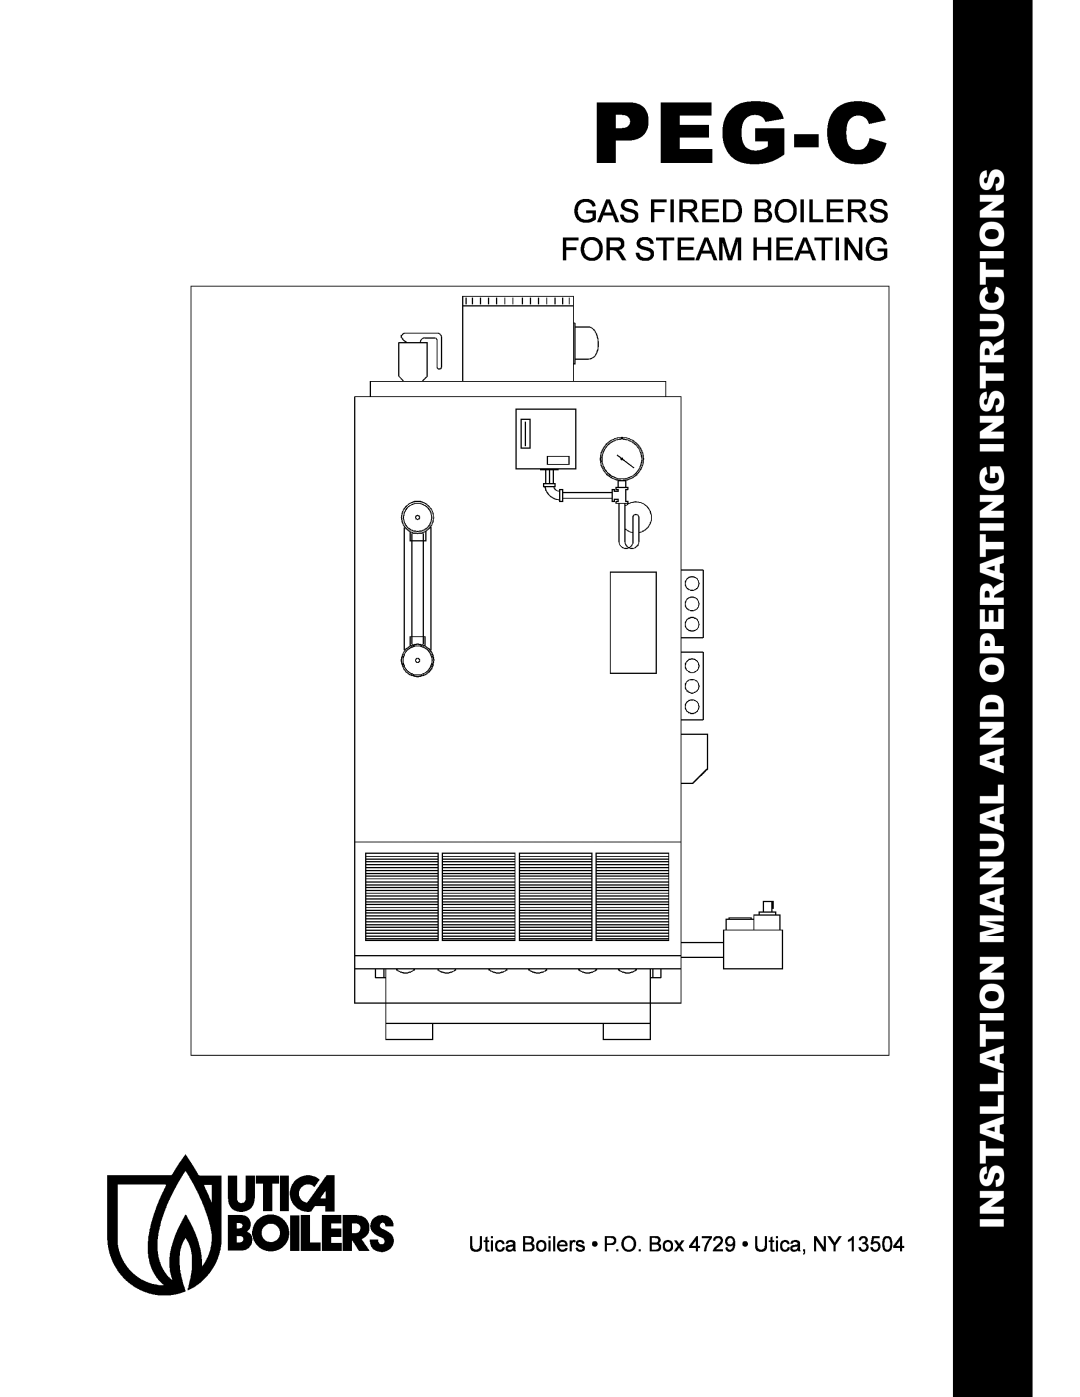 Utica PEG-C installation manual Peg-C, Installation Manual And Operating Instructions, Gas Fired Boilers For Steam Heating 